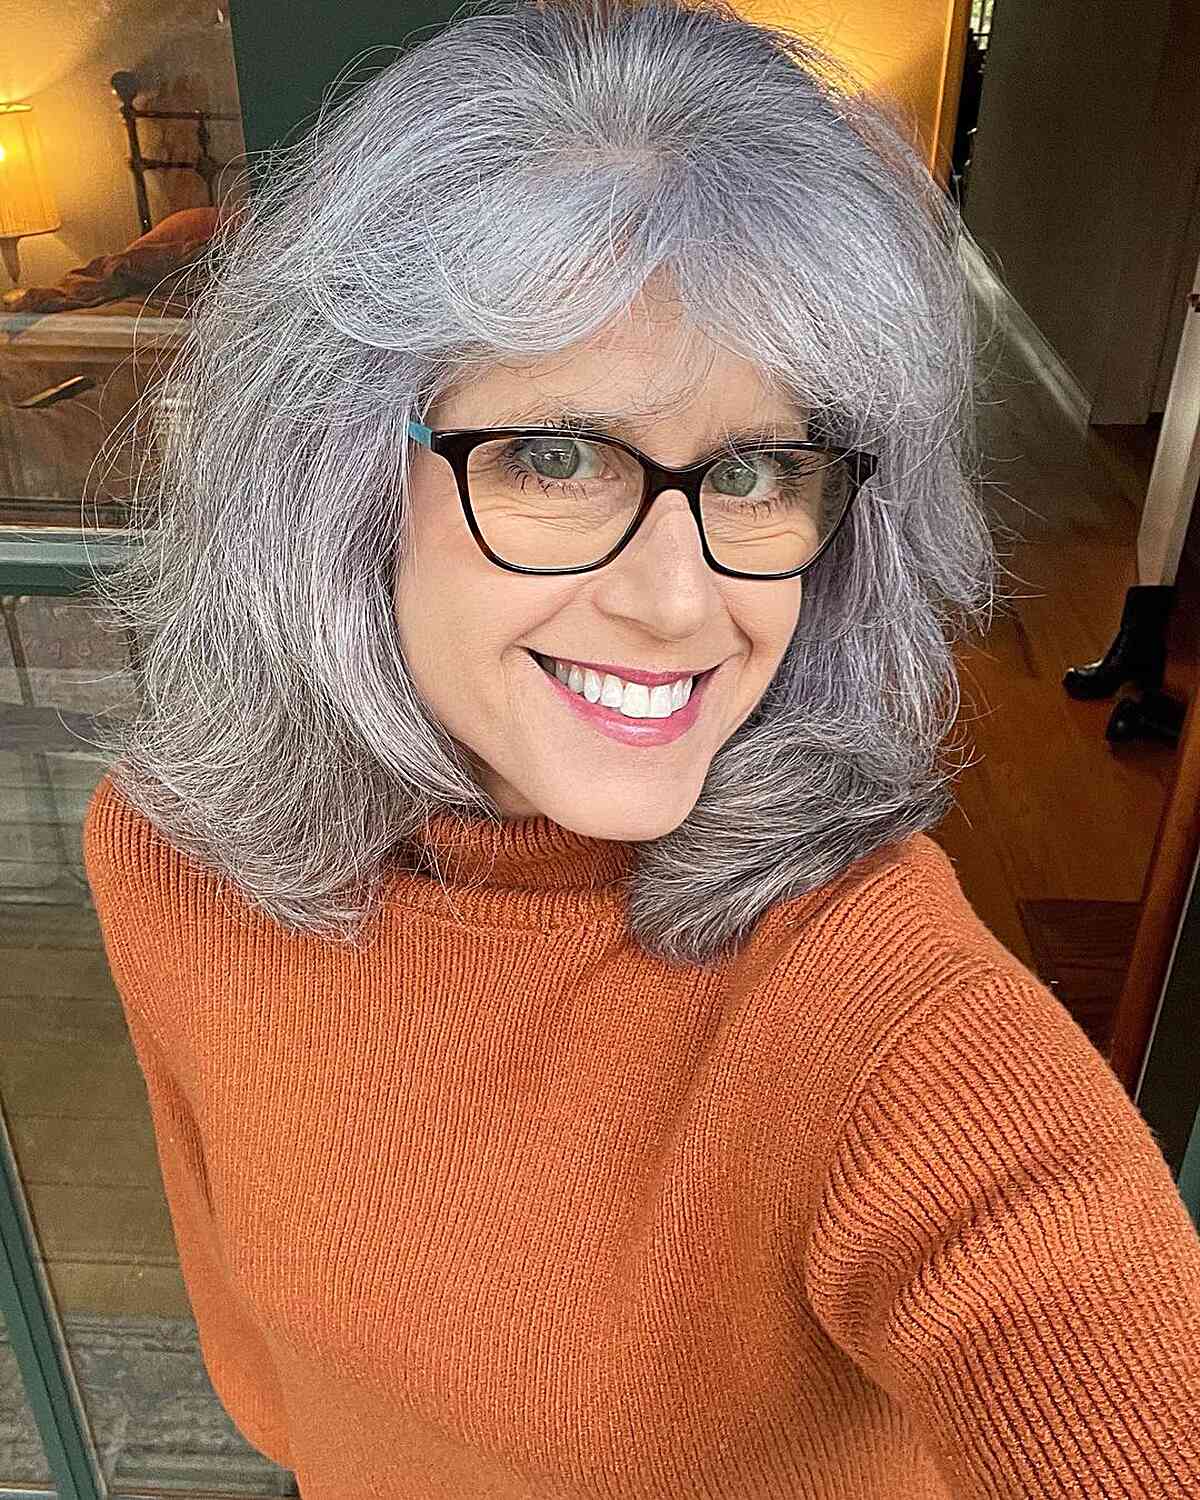 Shoulder-Length Cut with Feathered Layers and Bangs on 50-Year-Old Women with Glasses